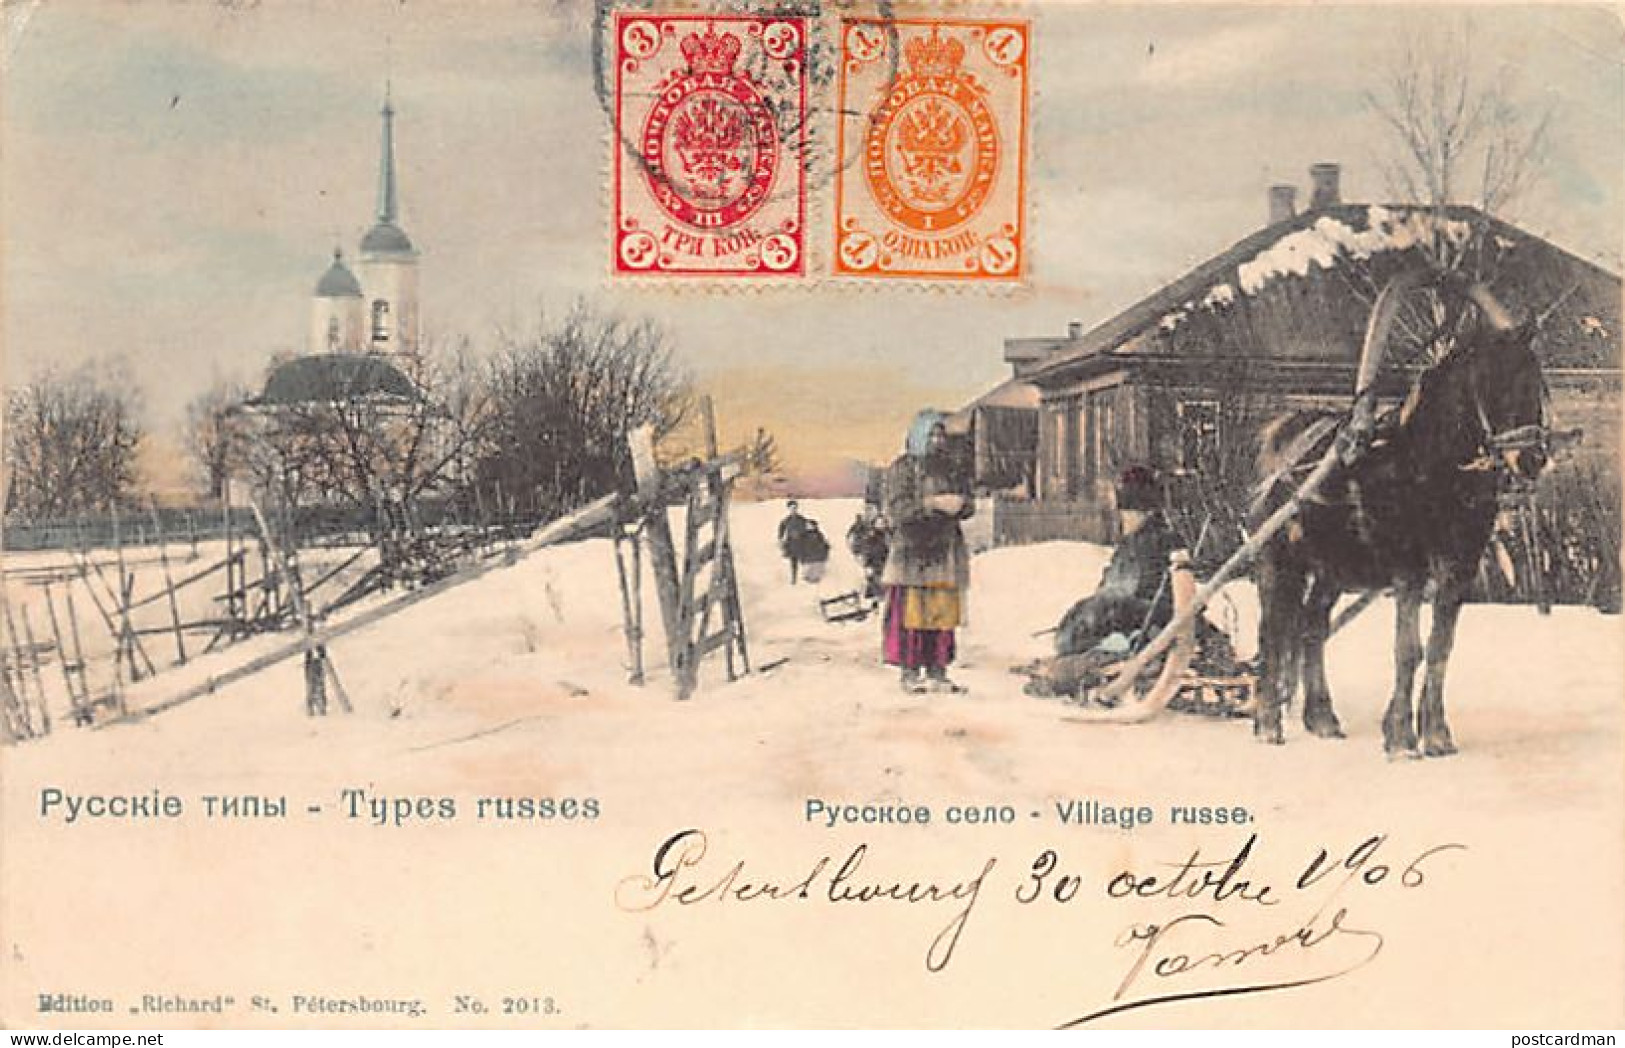 RUSSIA - Russian Types - Russian Village - Sleigh - Publ. Richard 2013 - Russland